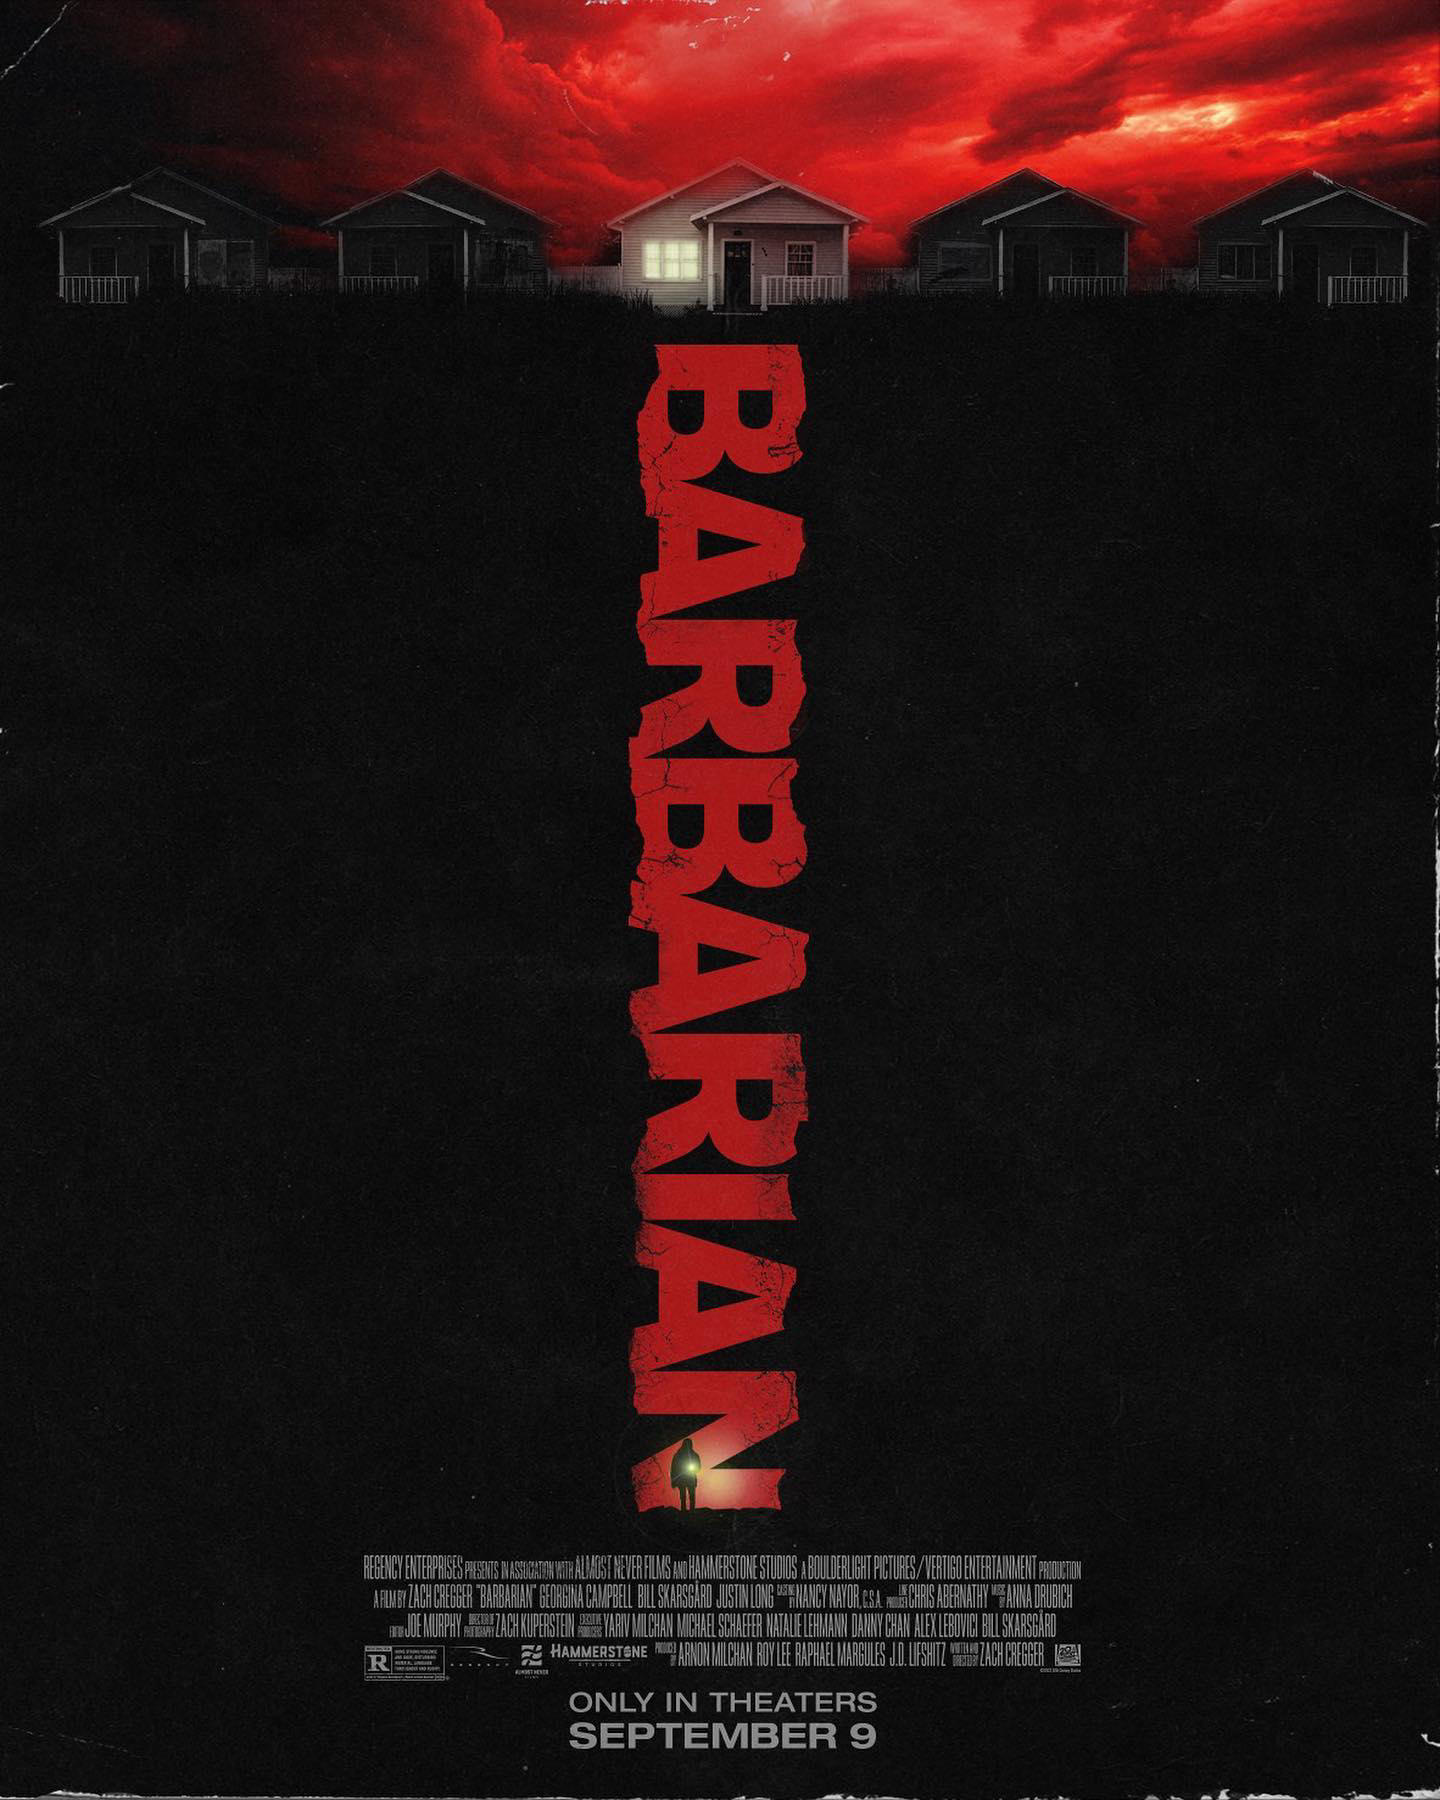 20th Century Studios - Check out this first in a series of posters inspired by #BARBARIAN